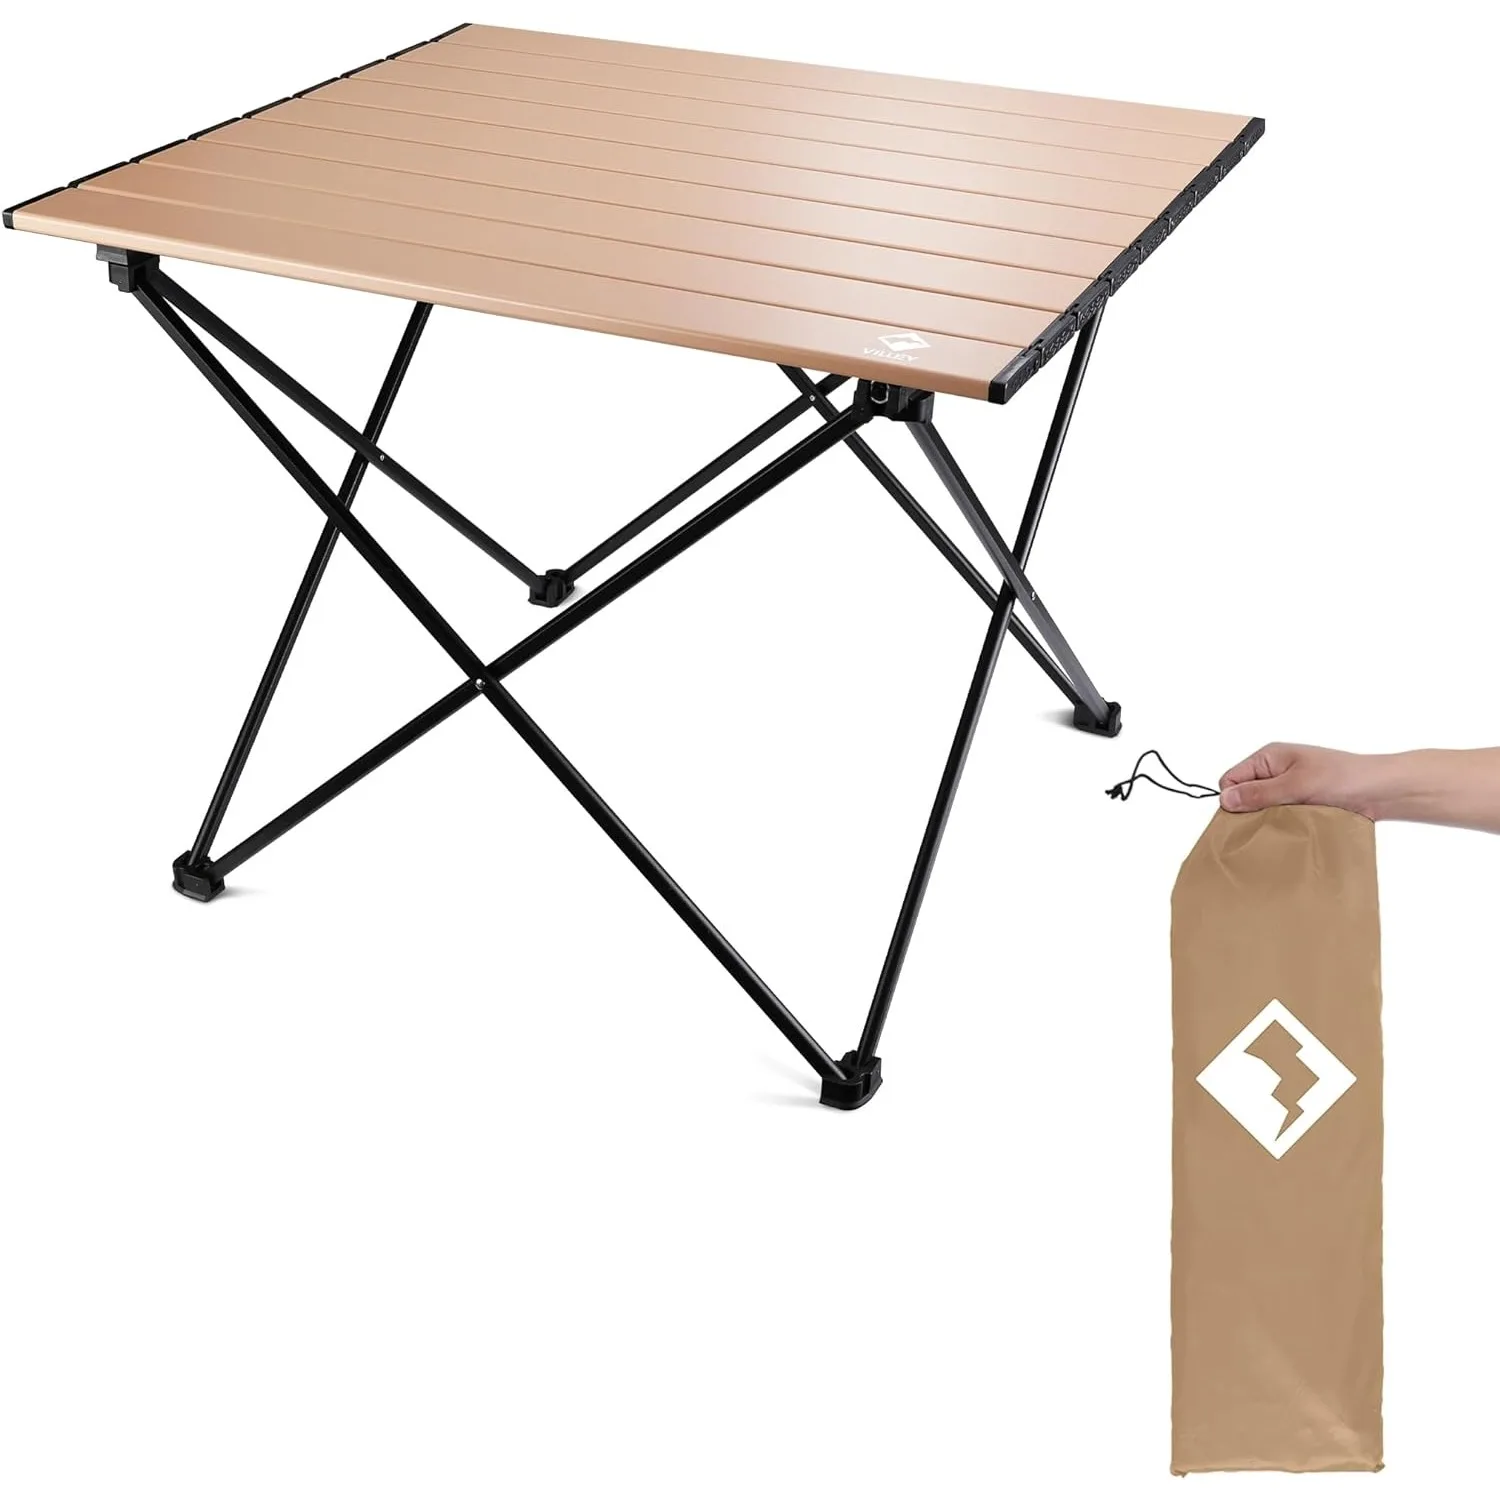 

VILLEY Portable Camping Side Table, Ultralight Aluminum Folding Beach Table with Carry Bag for Outdoor Cooking Picnic Camp